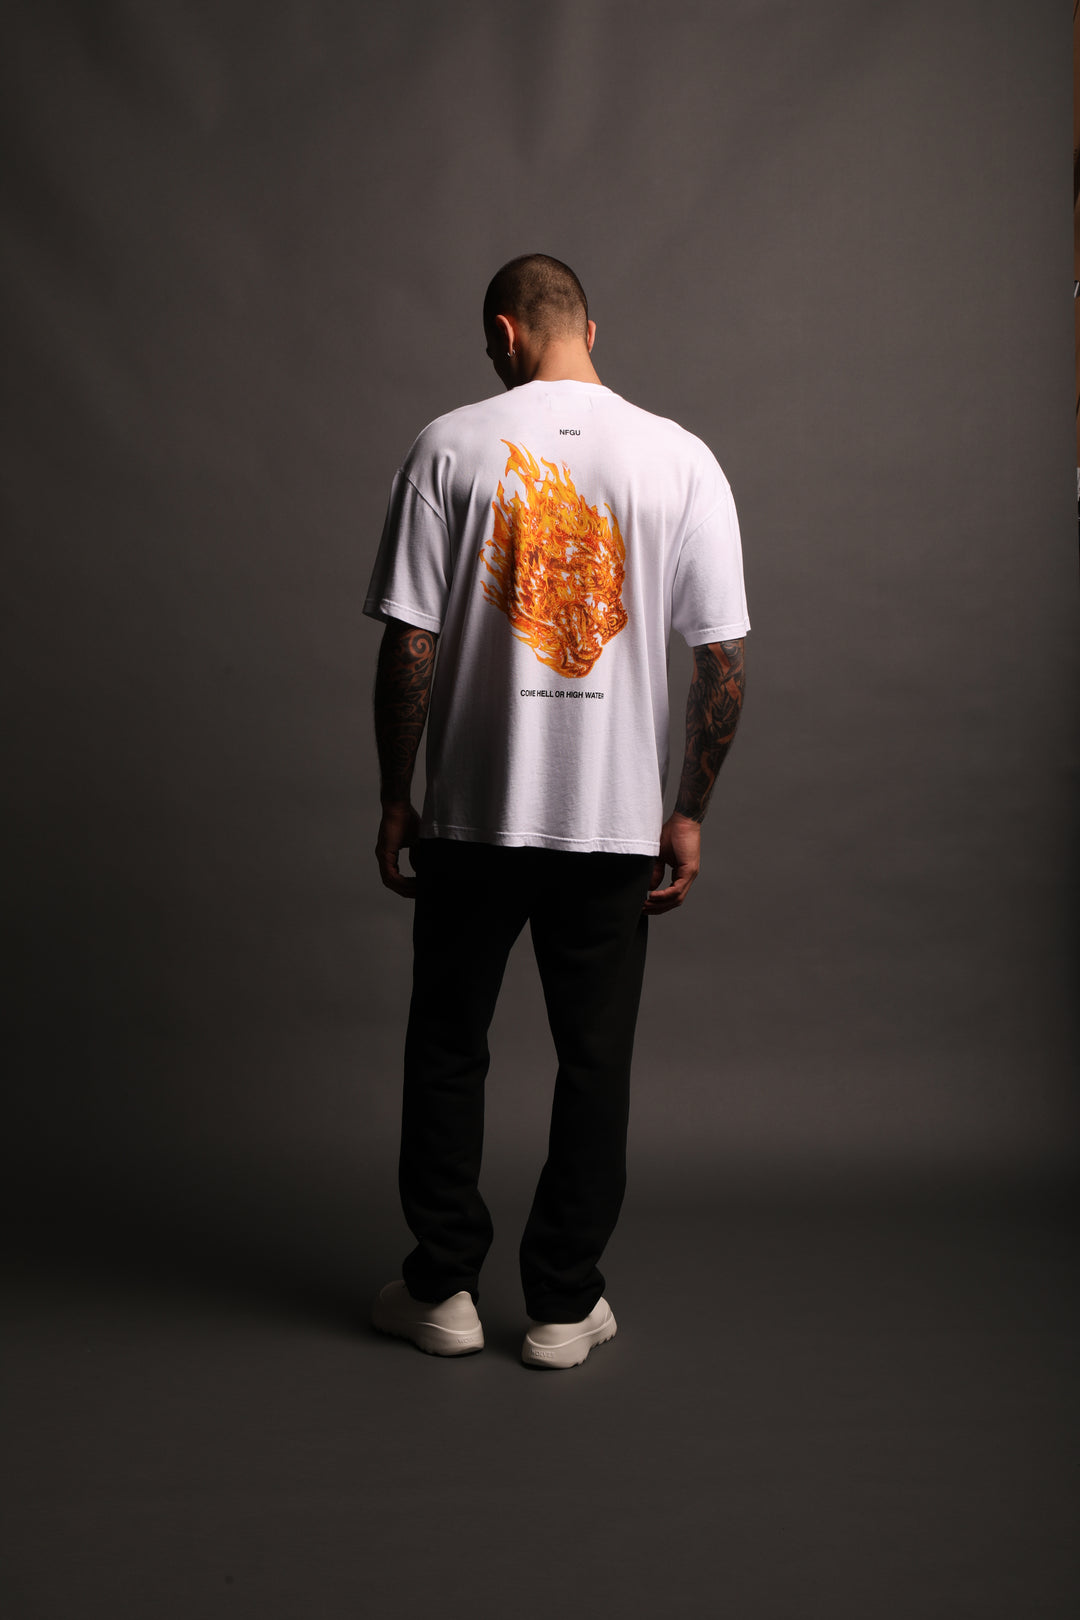 Come Hell Or High Water "Premium" Oversized Tee in White